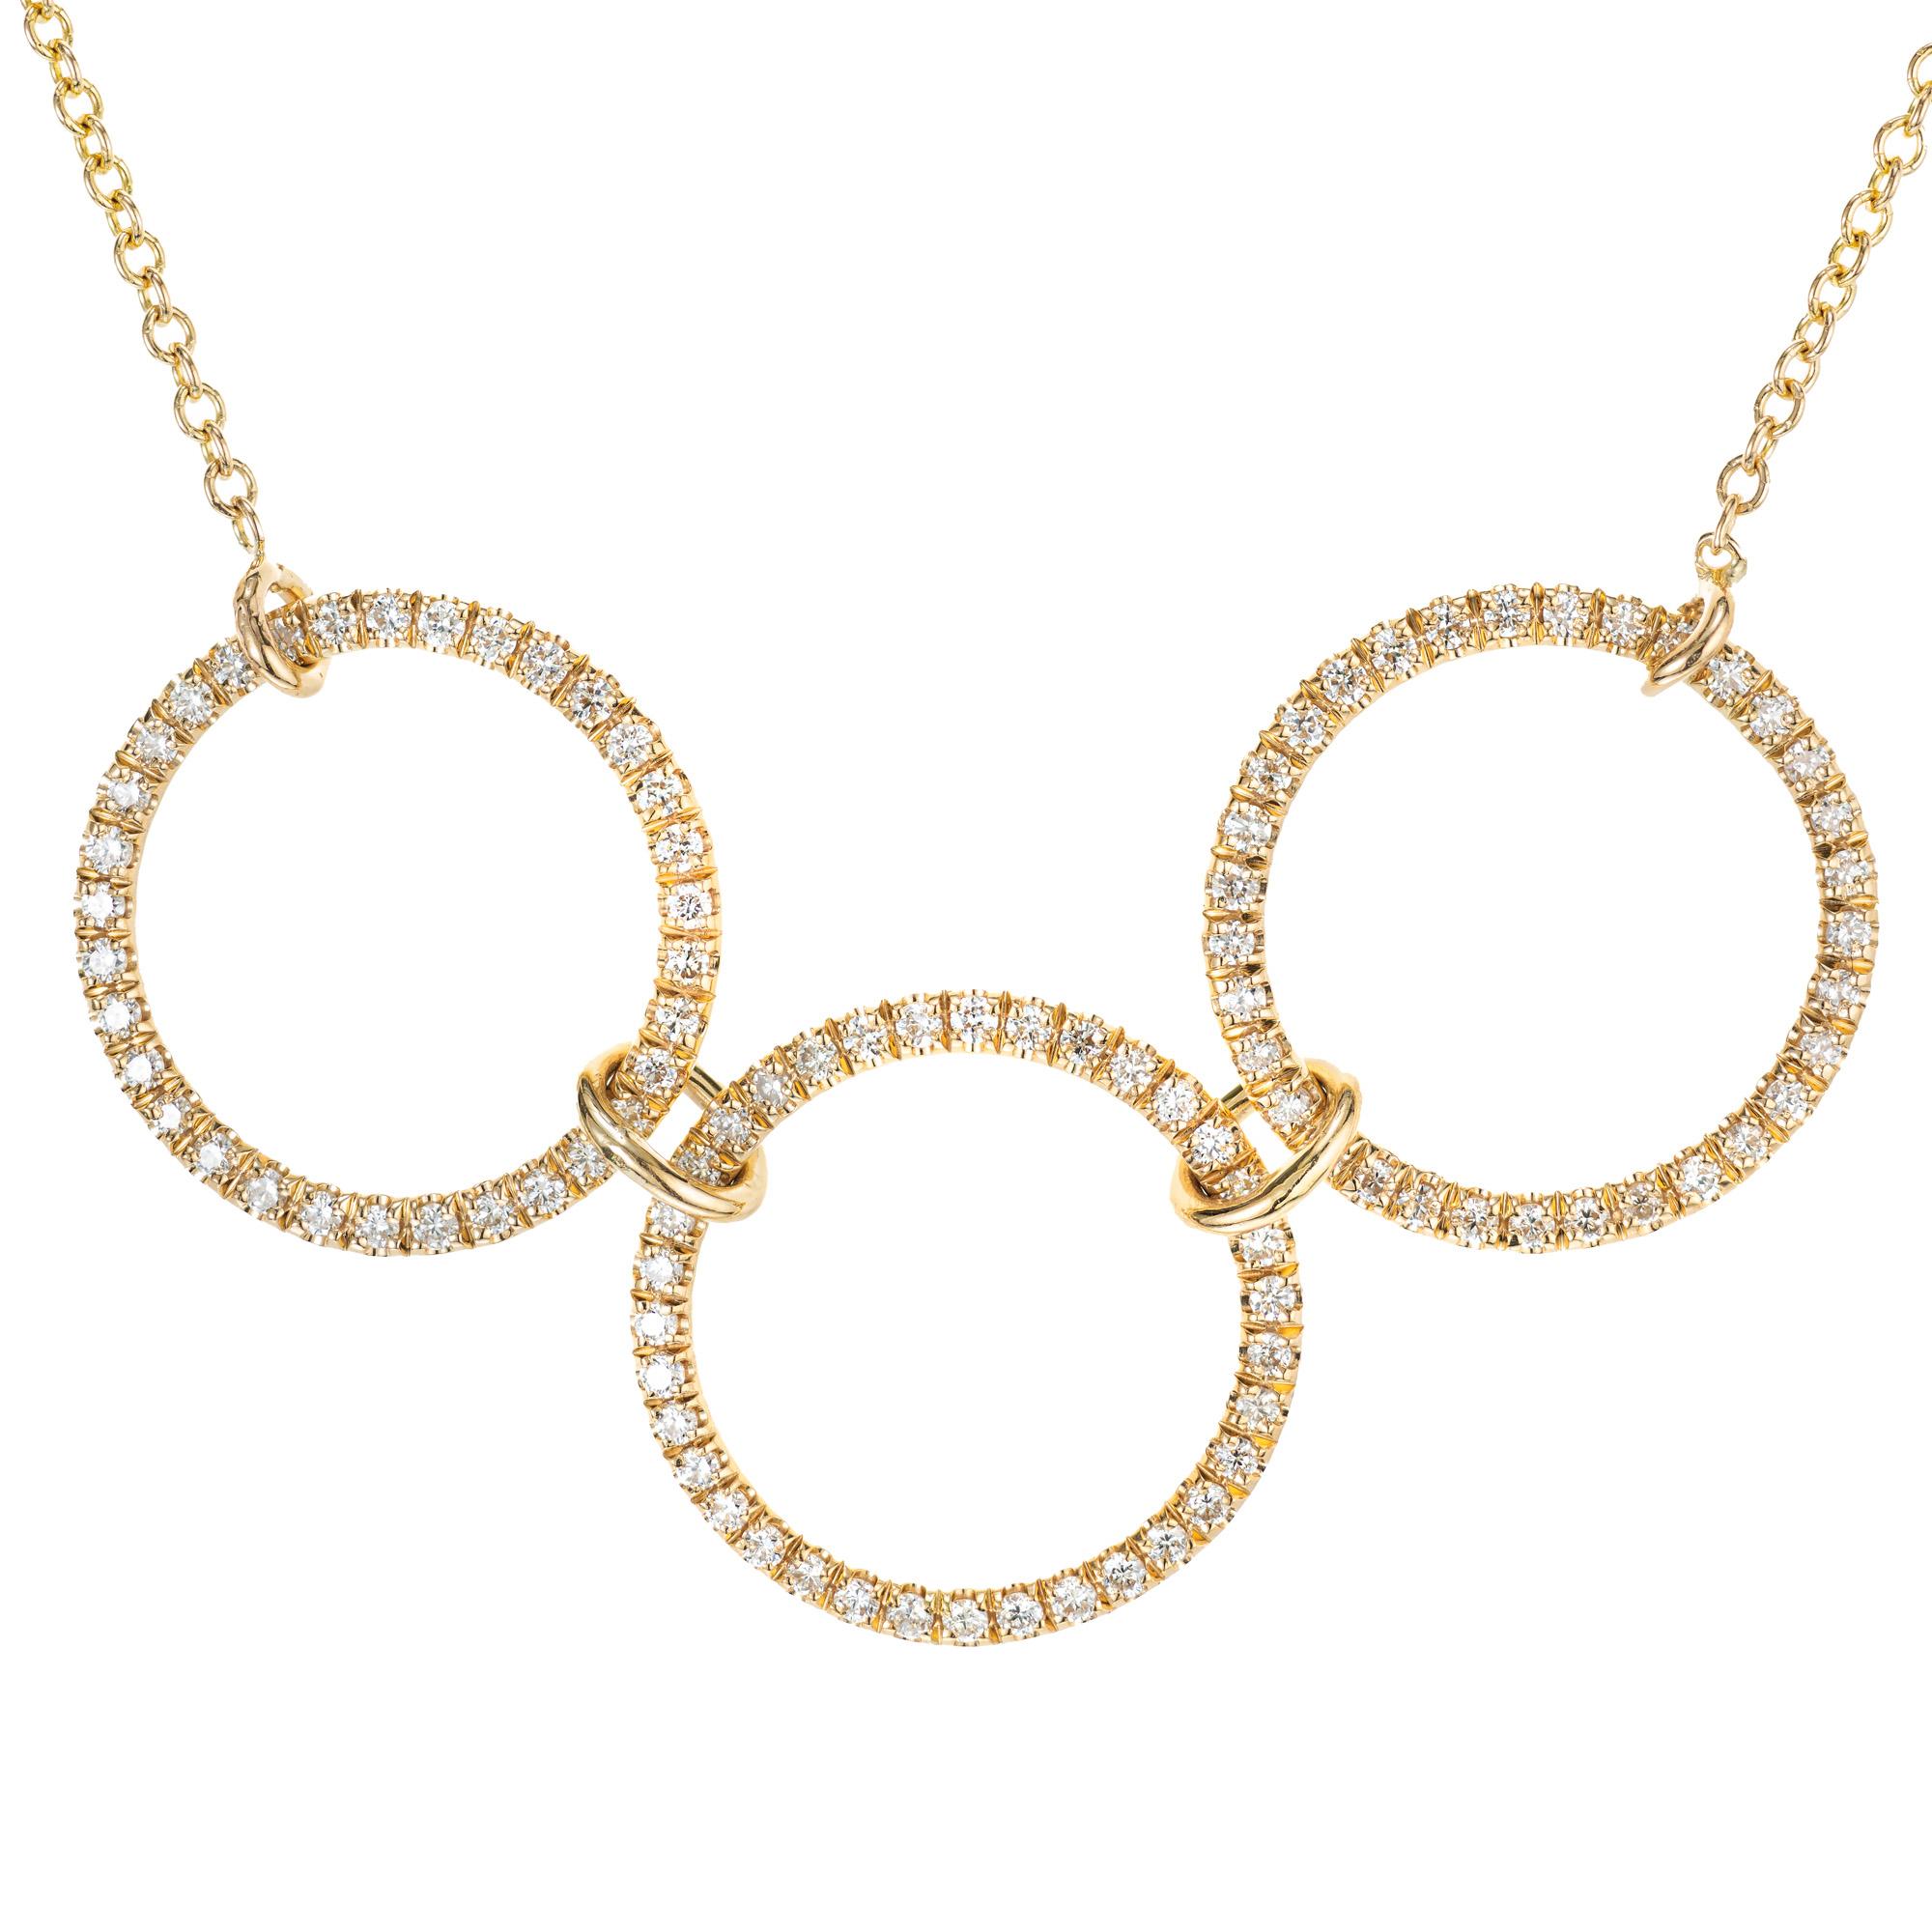 3 ring diamond pendant necklace. Consisting of 3 gold circles connected with gold loops set with 101 brilliant cut diamonds. 16.5 inches. Designed and crafted in the Peter Suchy workshop

101 round brilliant cut diamonds, G VS approx. .28cts
14k